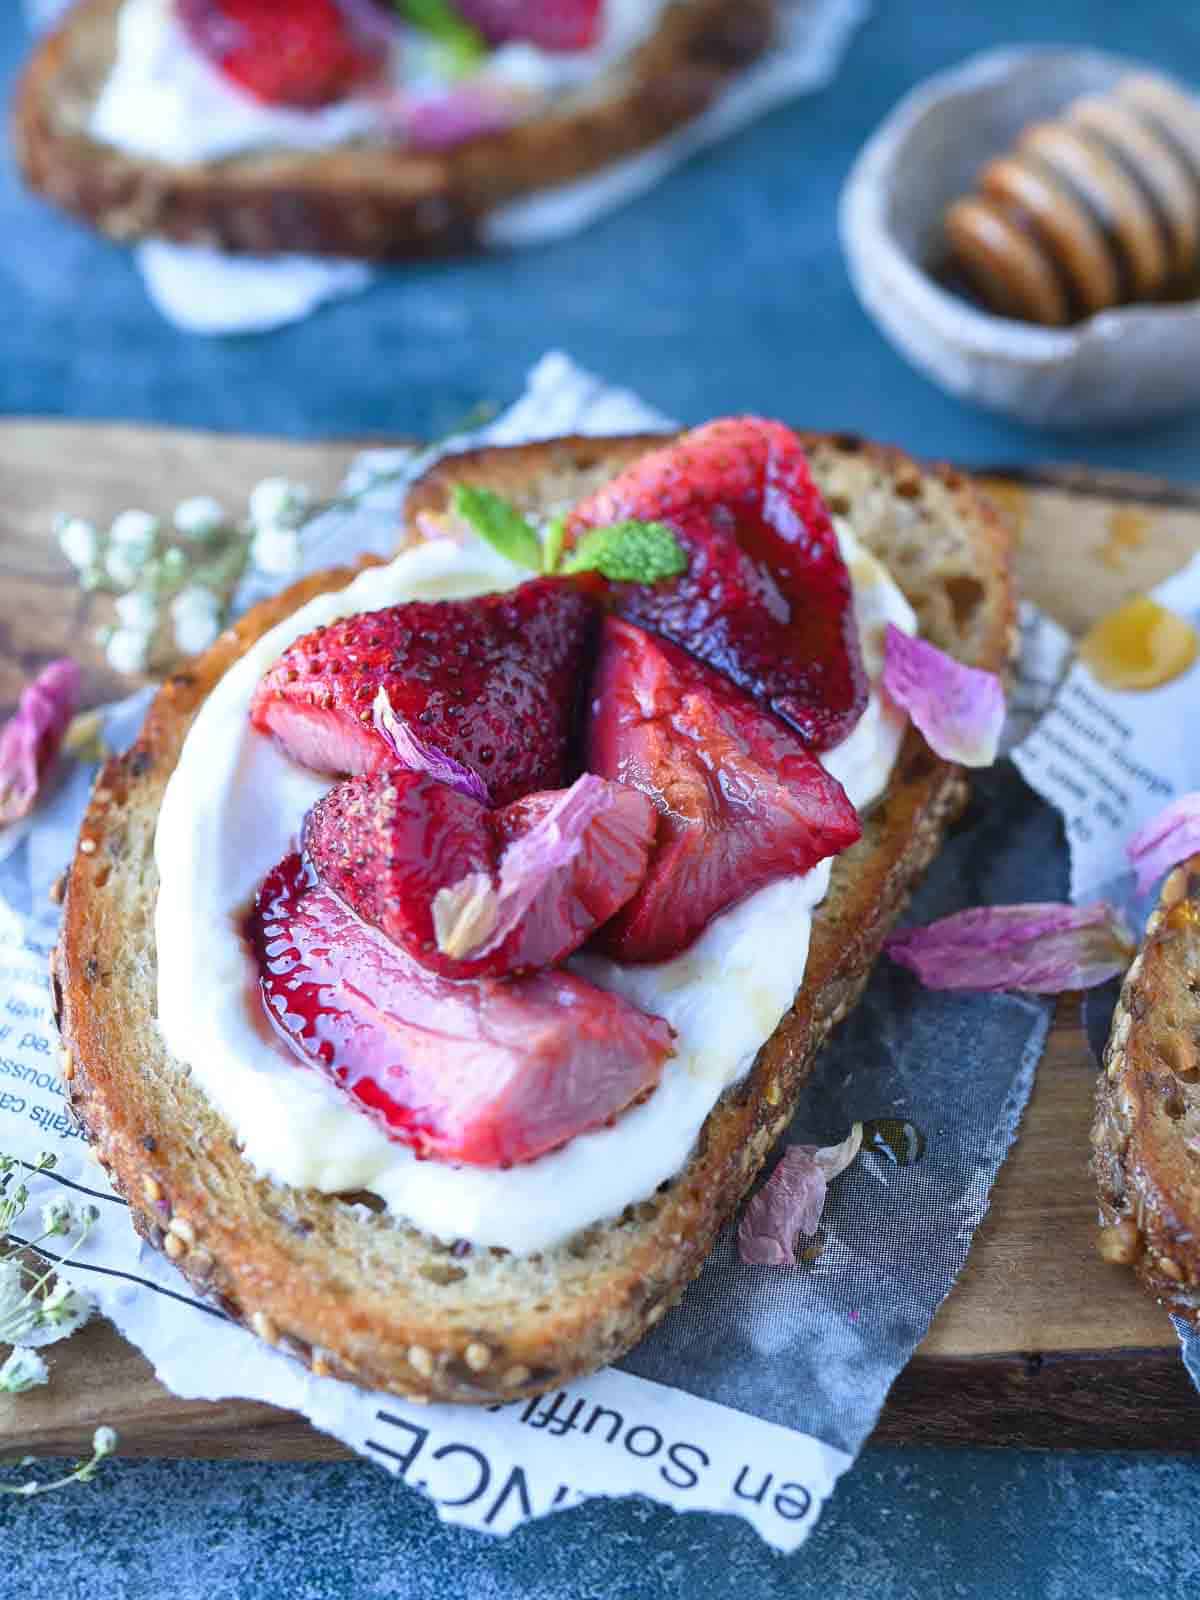 Roasted strawberries and labneh on toast over a cutting board.